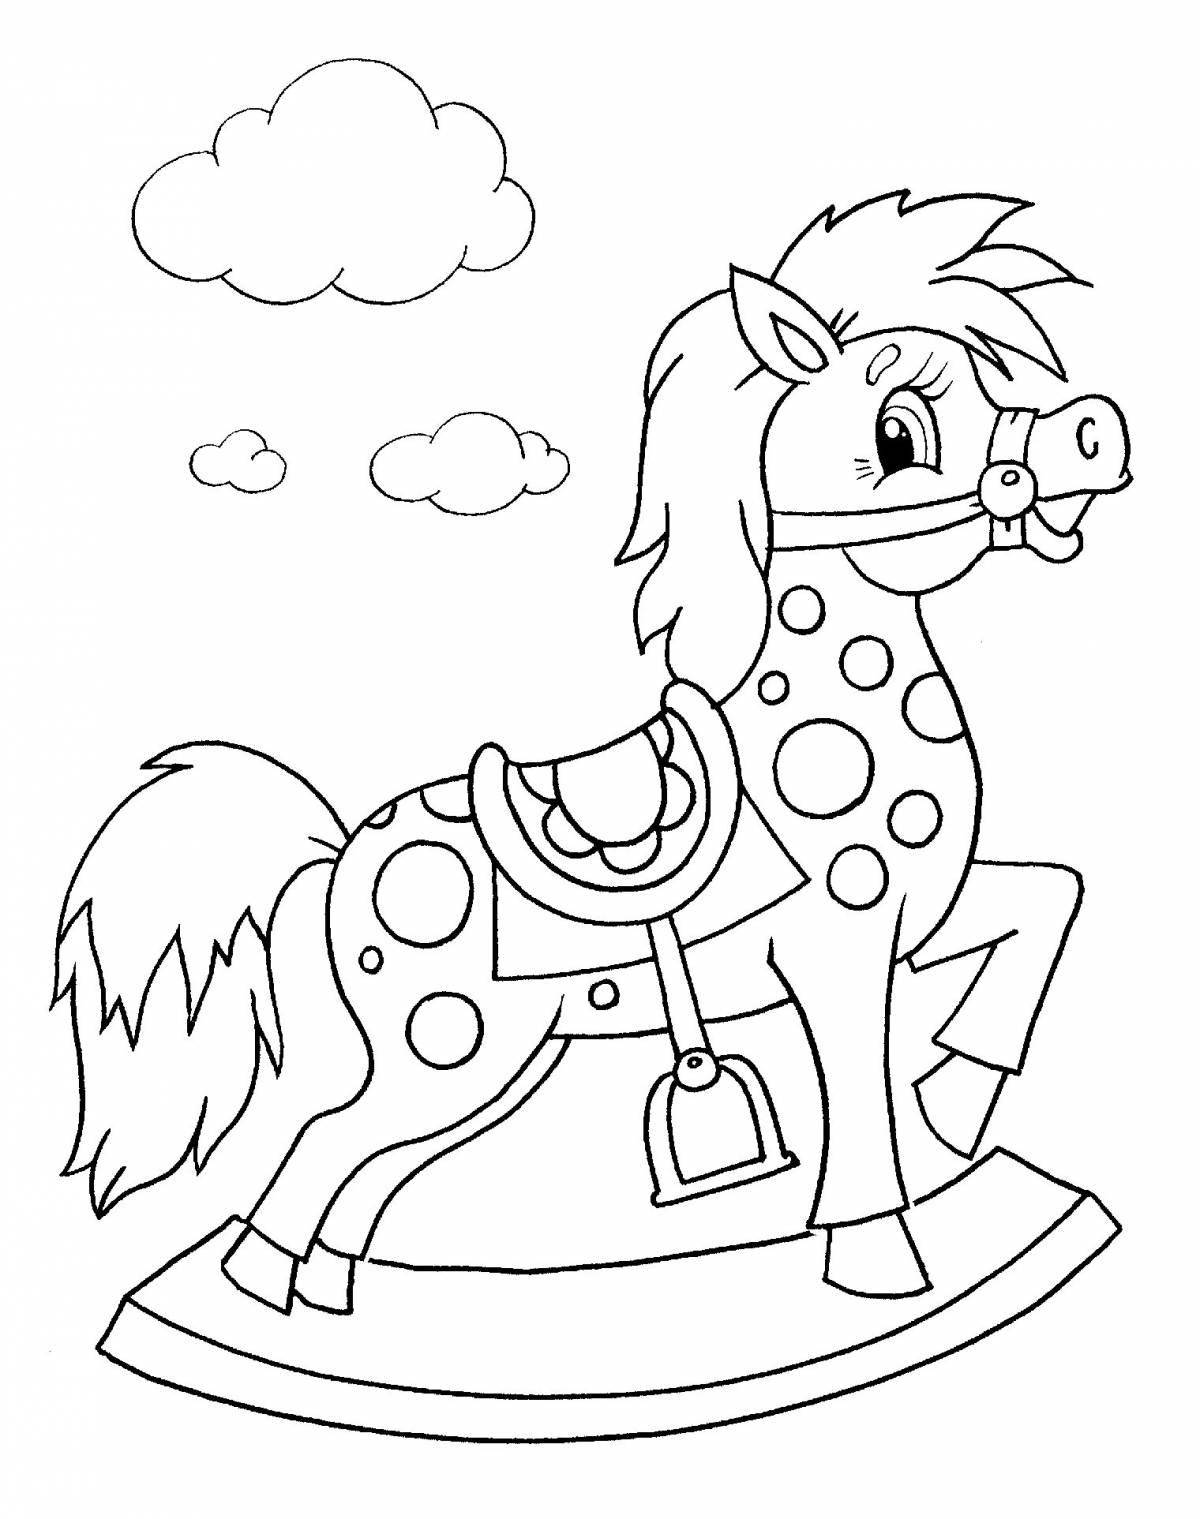 Elegant horse coloring book for children 6-7 years old